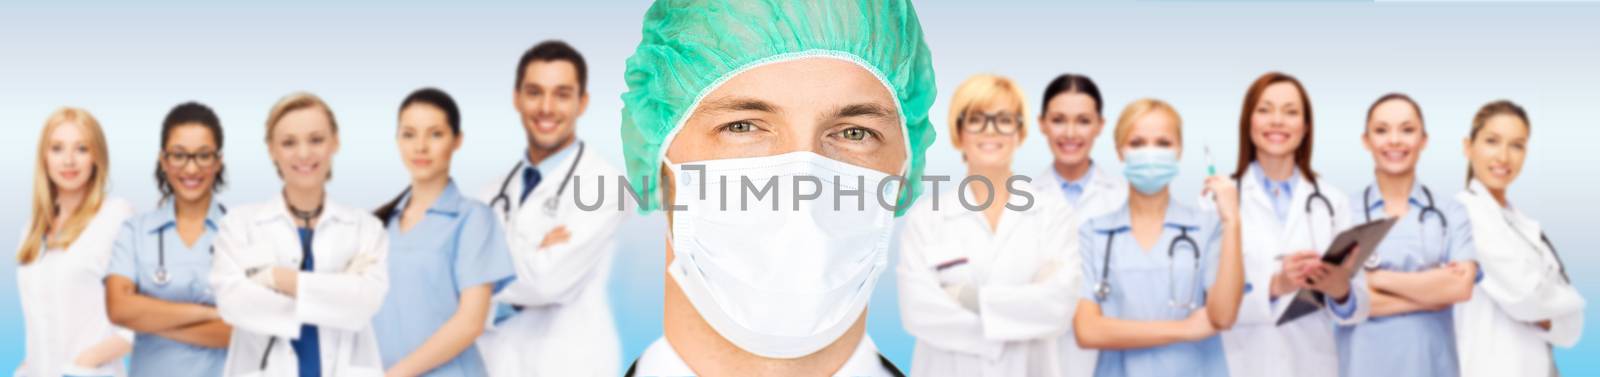 people, medicine and health care concept - surgeon in medical cap and mask over group of medics on blue background